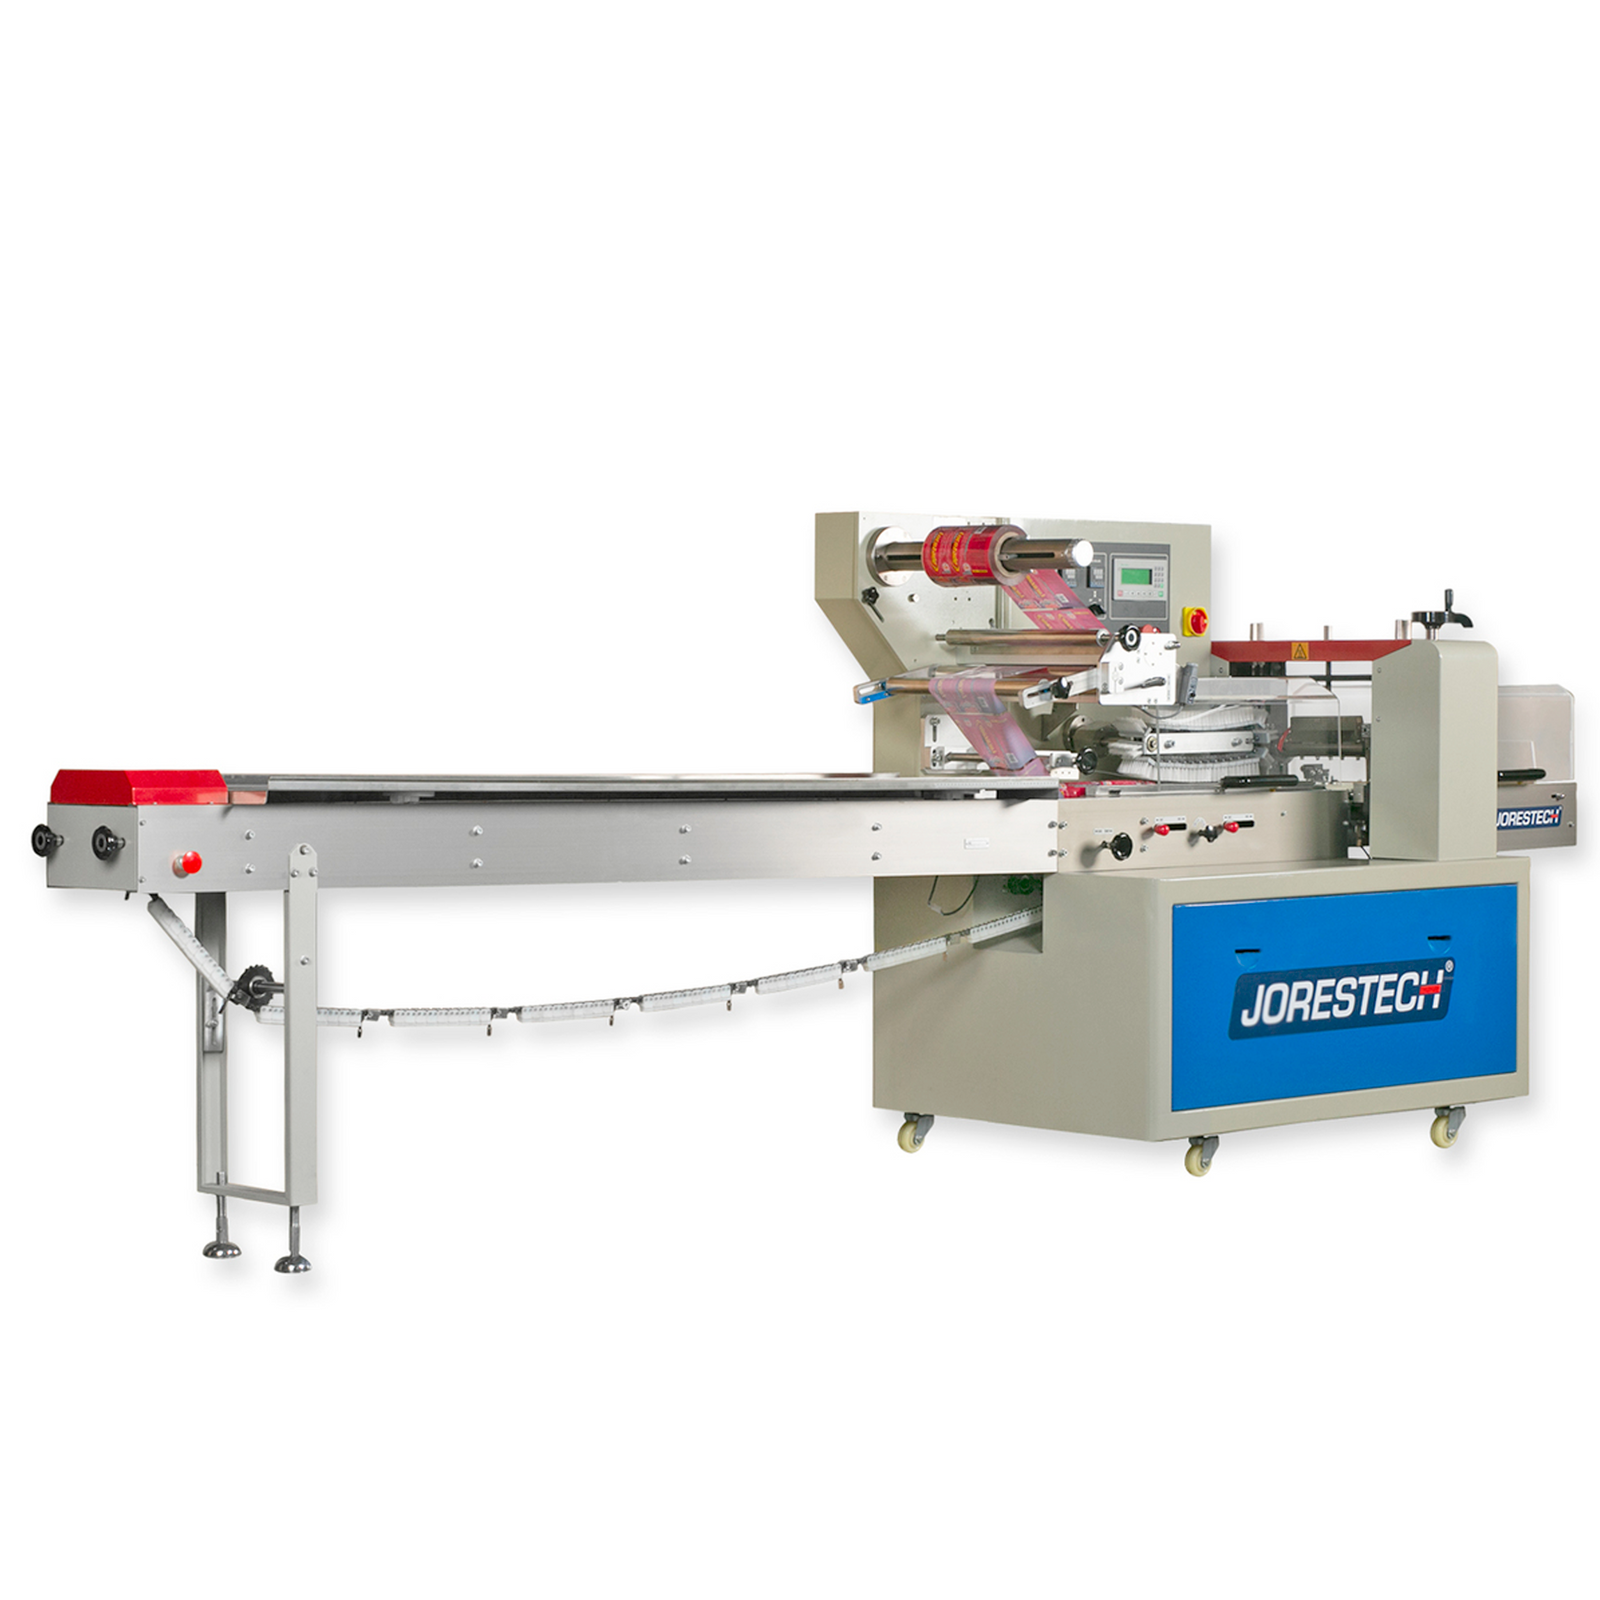 Diagonal view of a JORESTECH automatic horizontal flow wrapping machine over a white background.